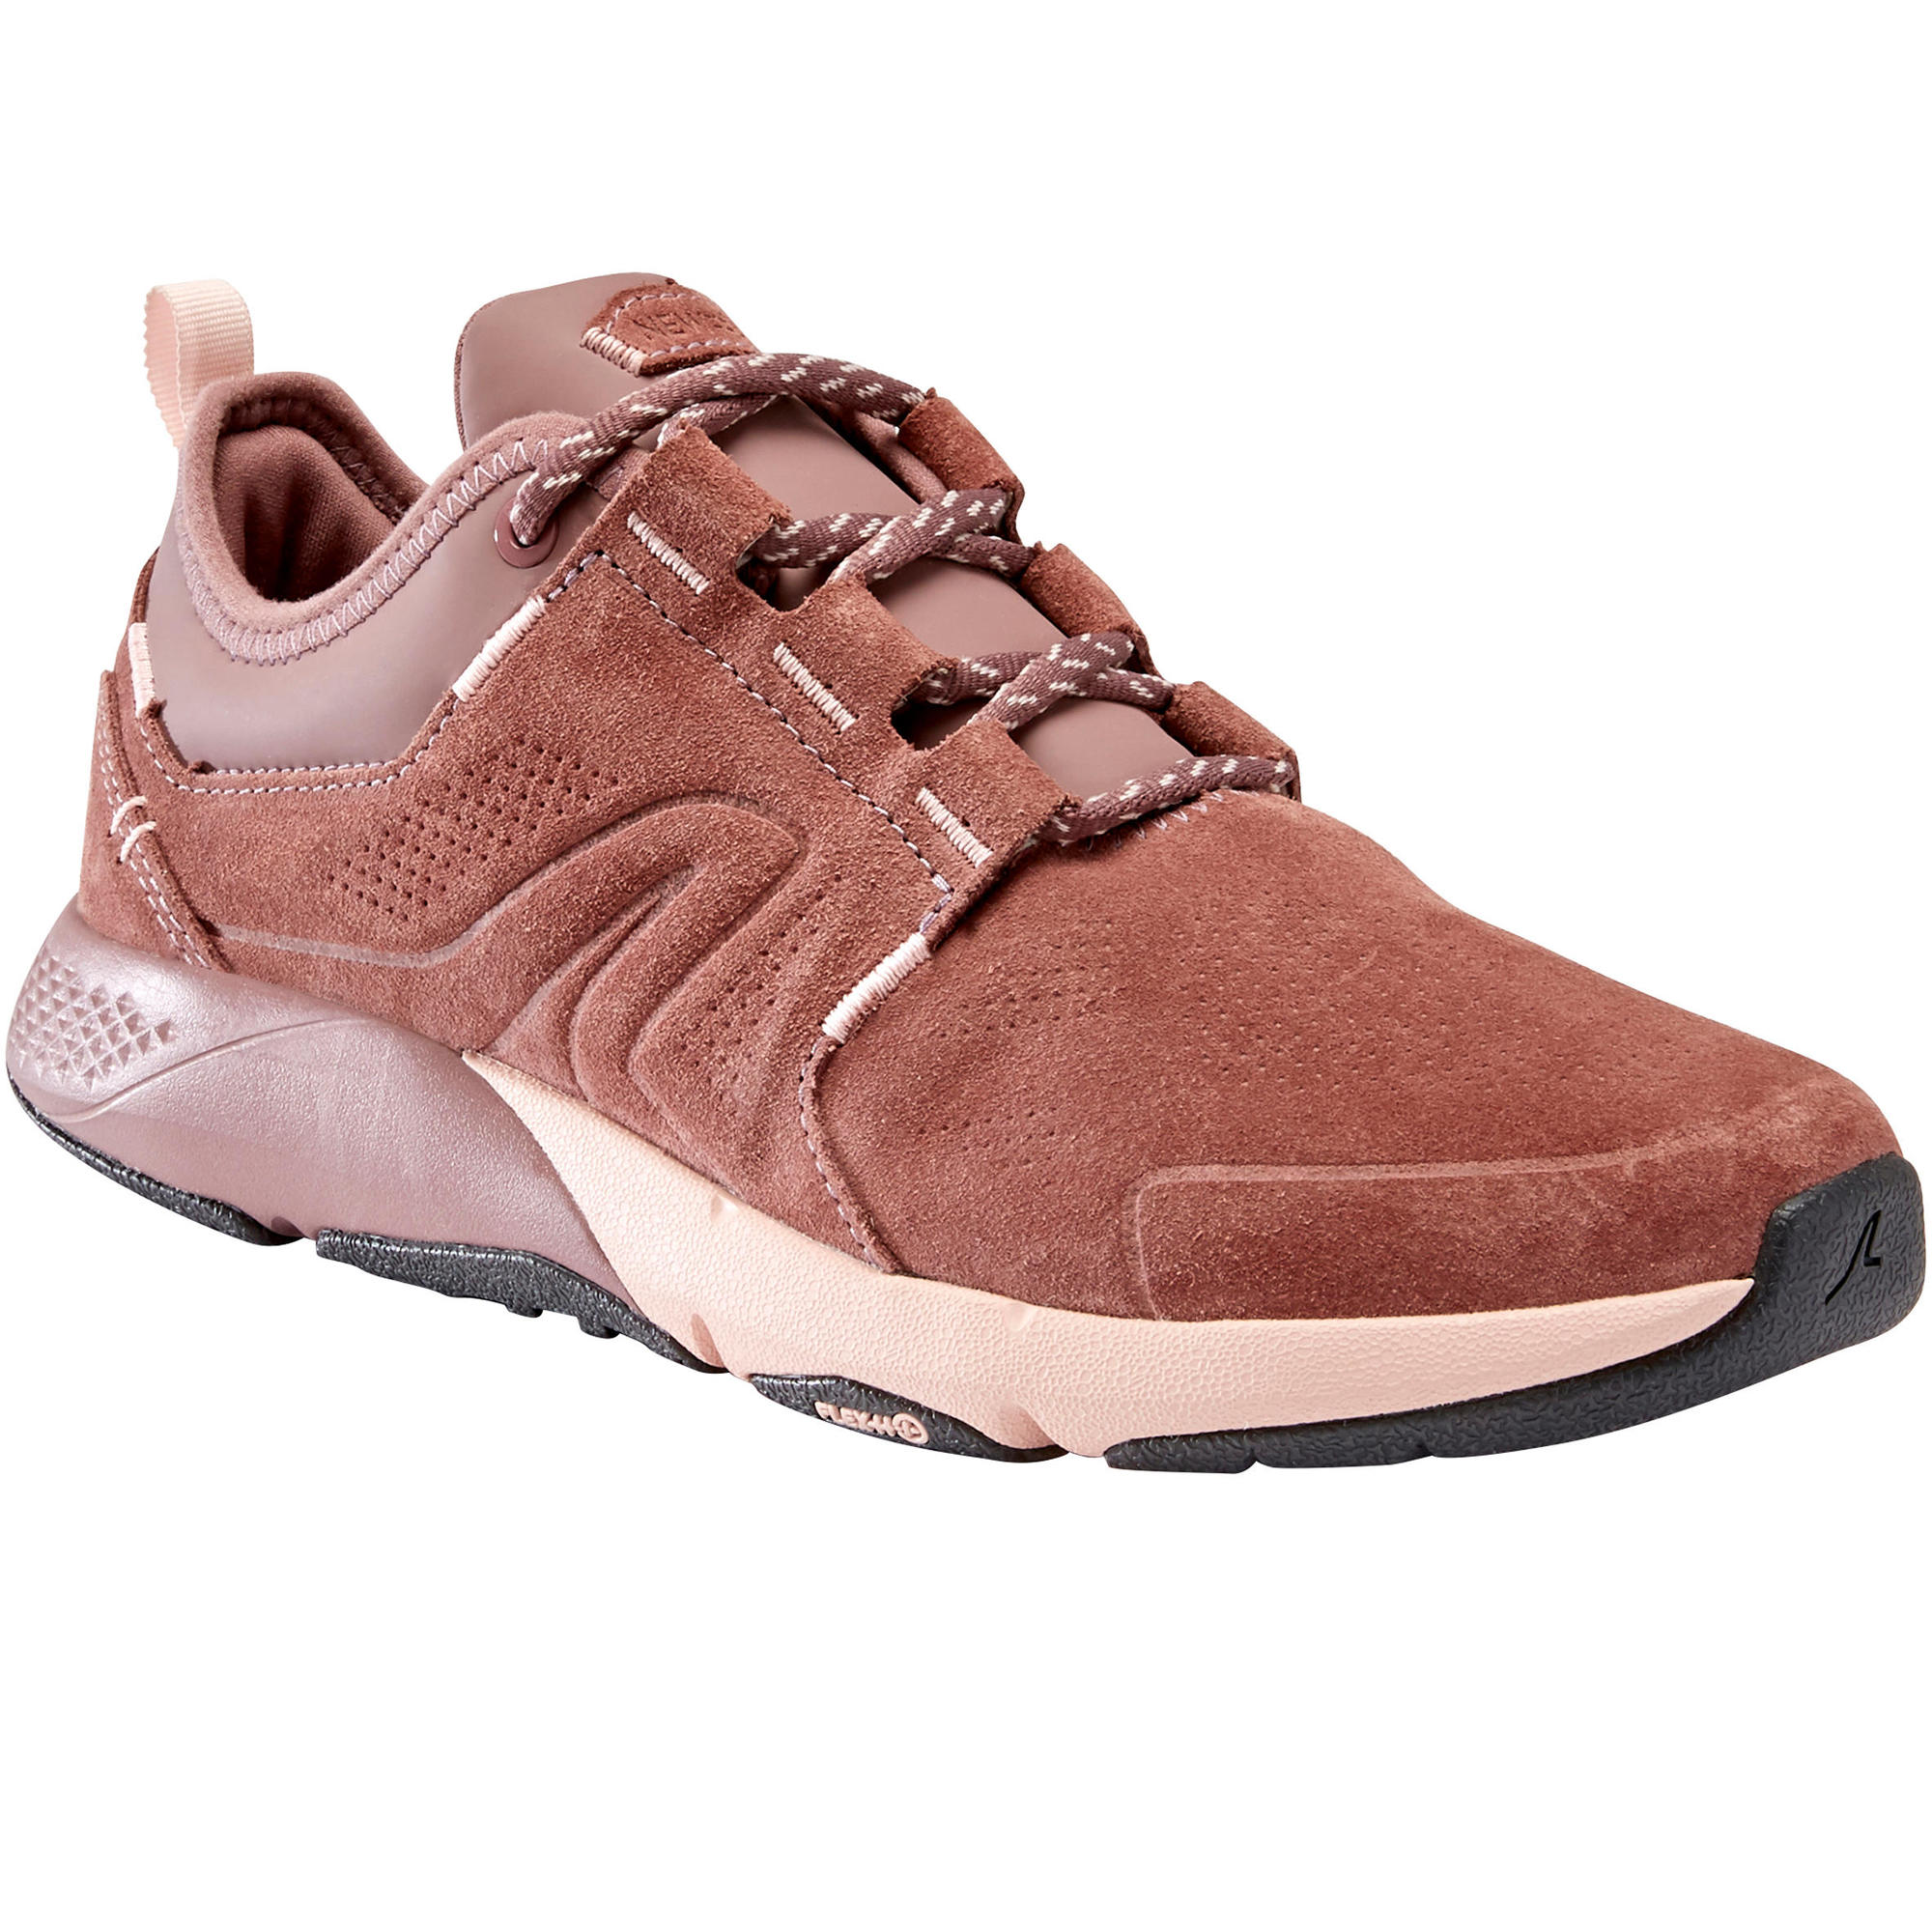 comfortable leather walking shoes